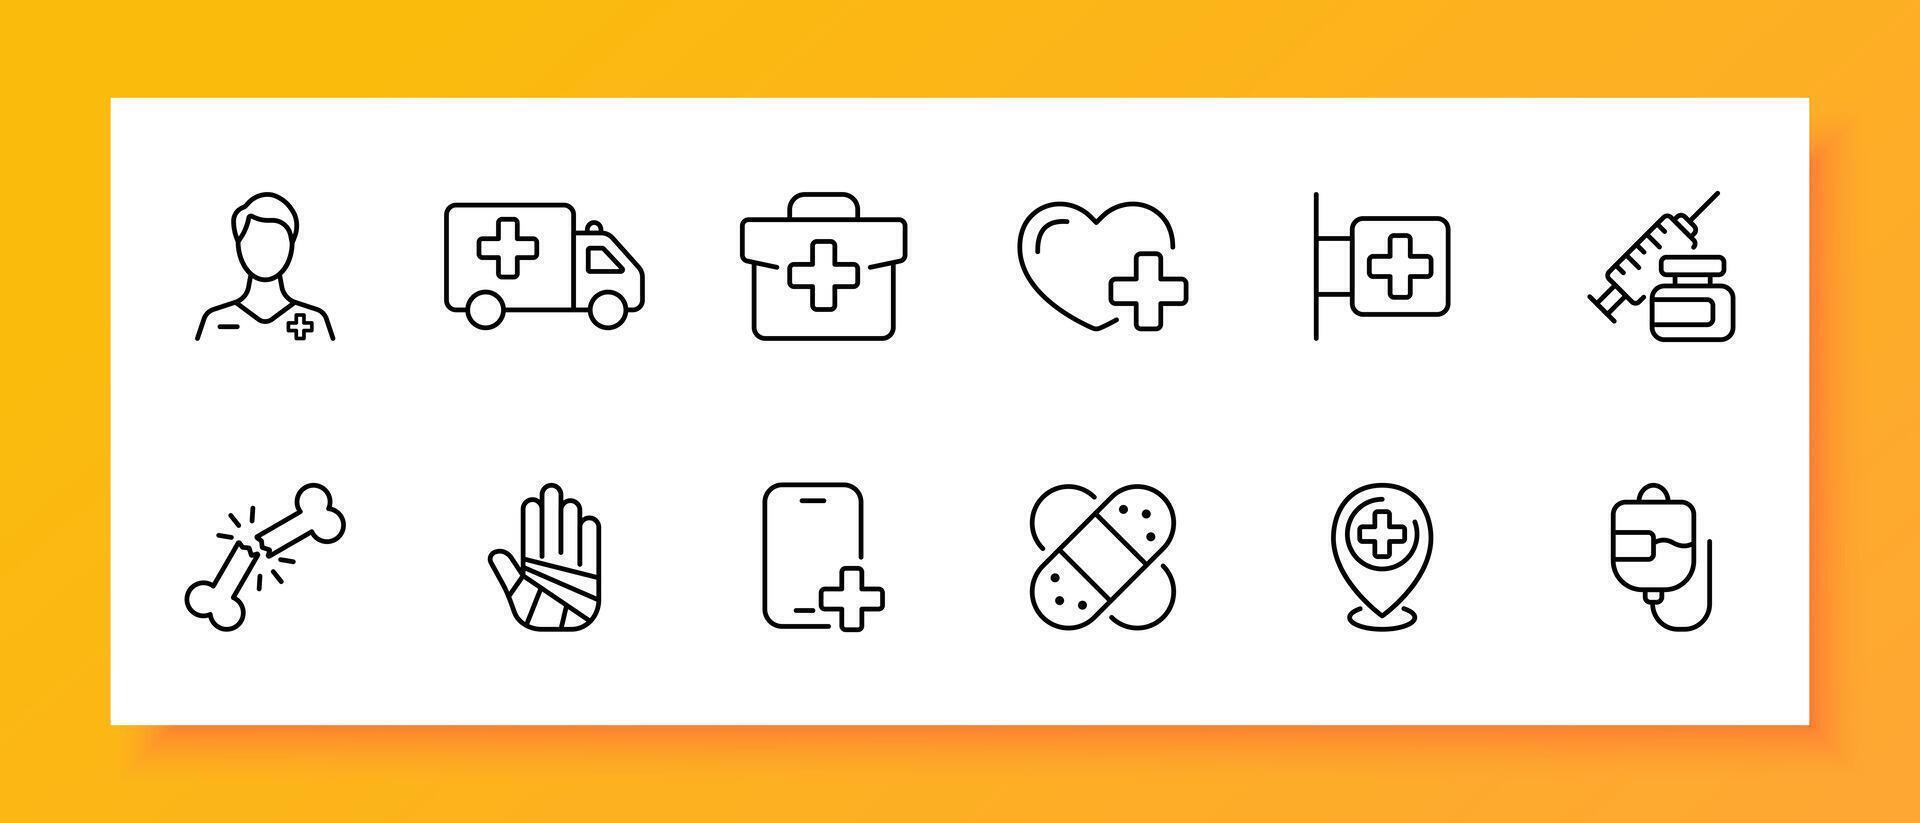 Medicine icon set. Ambulance, smartphone, plaster, GPS tag, blood transfer, crunching bones, first aid kit. Black icon on a white background. Vector line icon for business and advertising